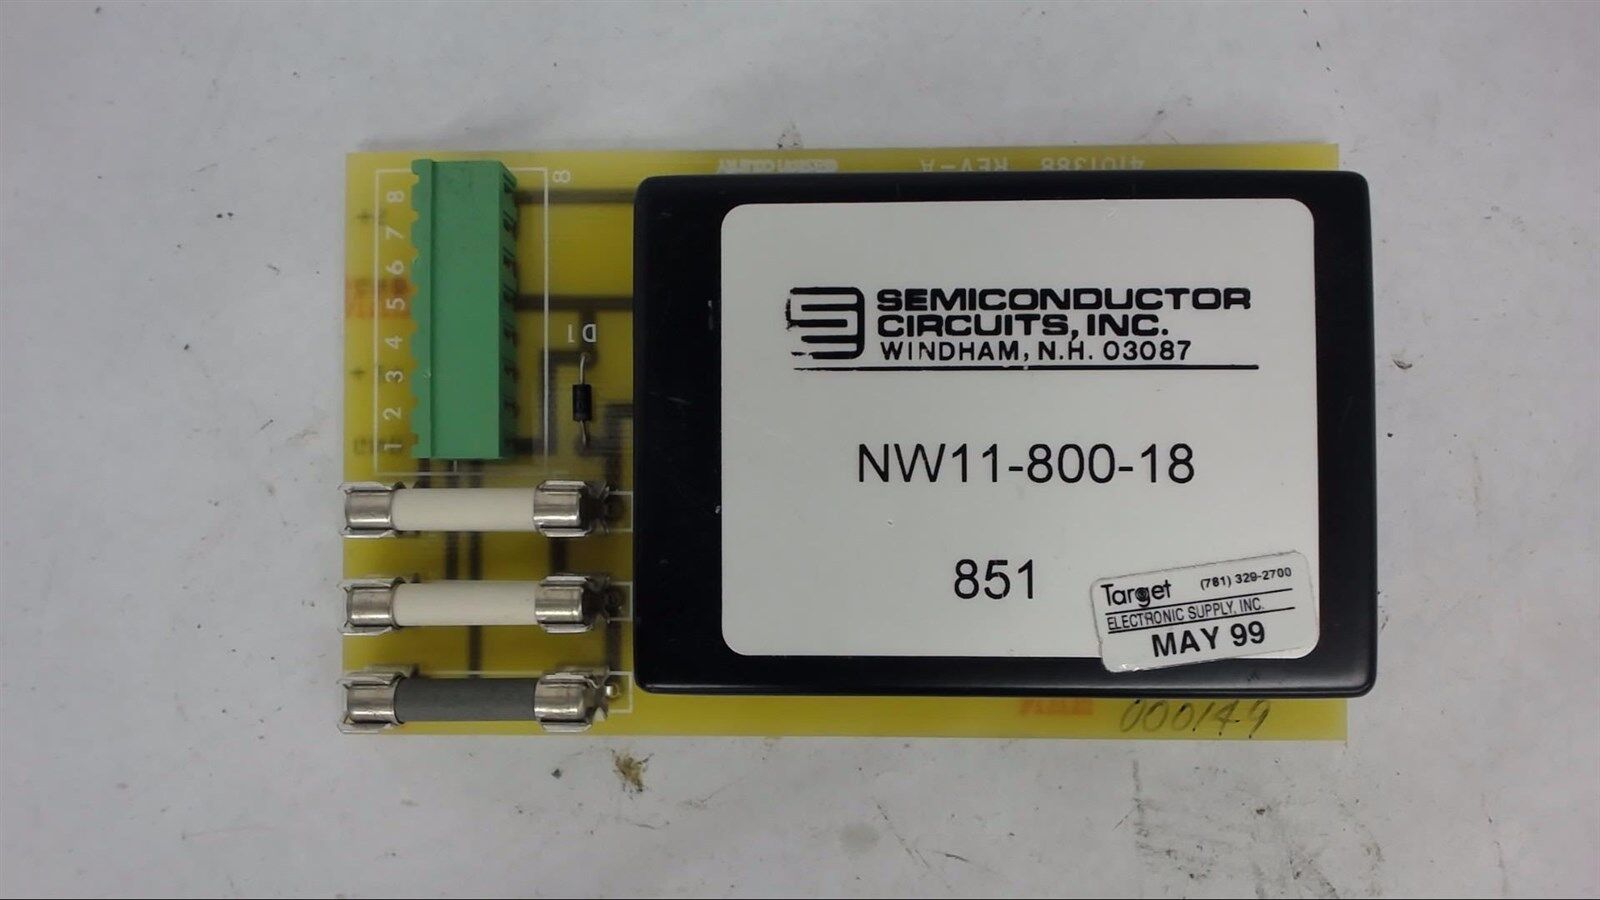 Control Board With Nw11-800-18 Semiconductor